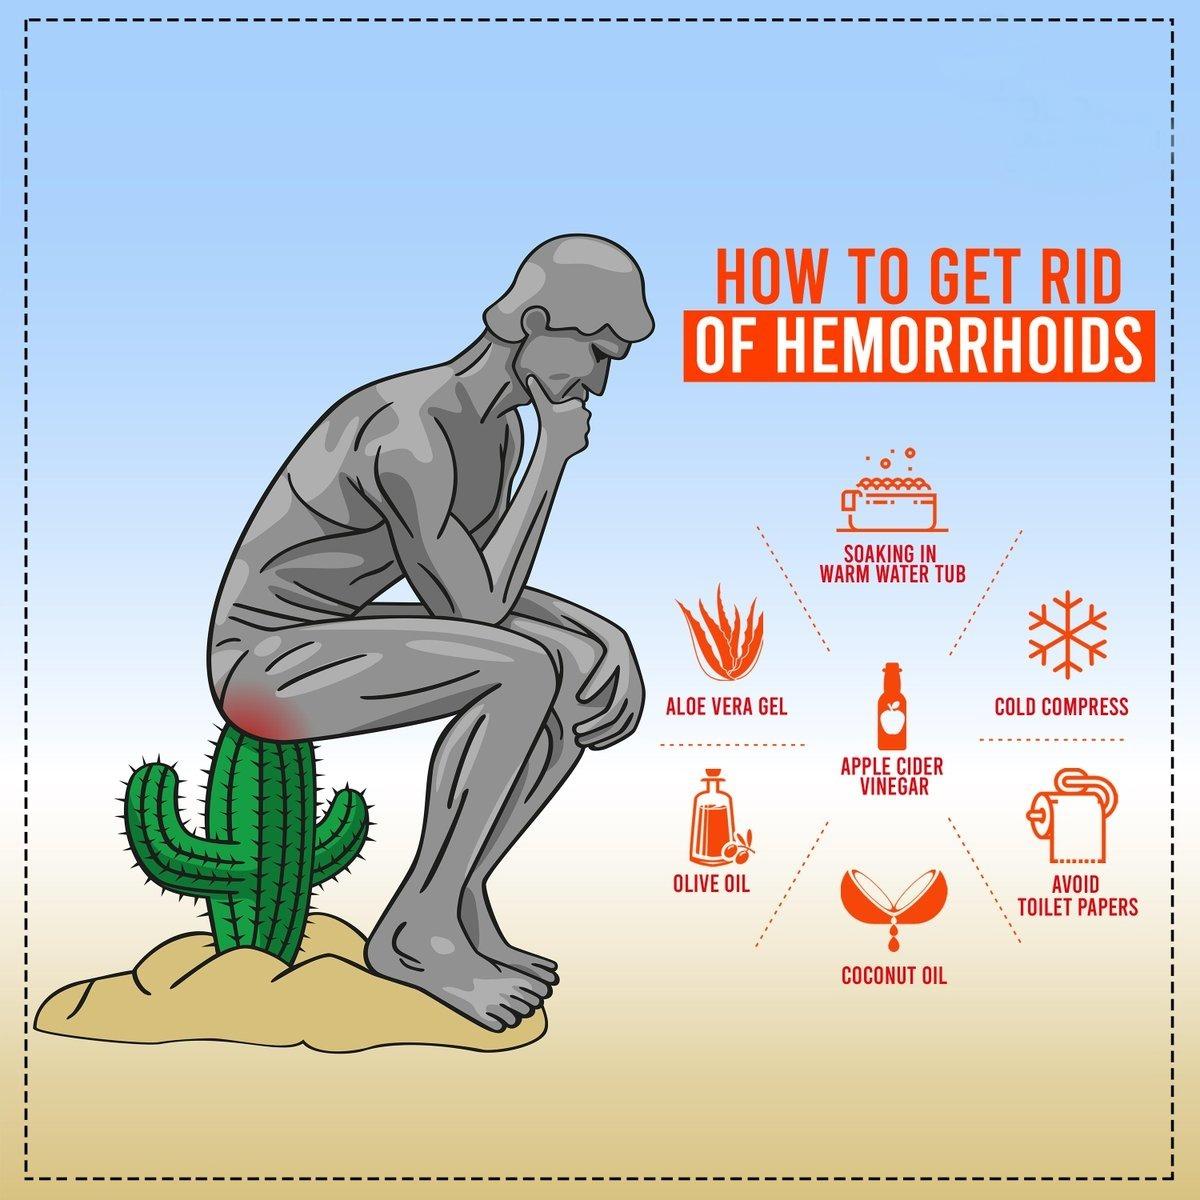 While hemorrhoids are not necessarily harmful, it is important to treat them to prevent long term problems. Here are a few natural home remedies to prevent and treat hemorrhoids.
#hemorrhoids #problems #homeremedies #apollofoundation #Healingindia